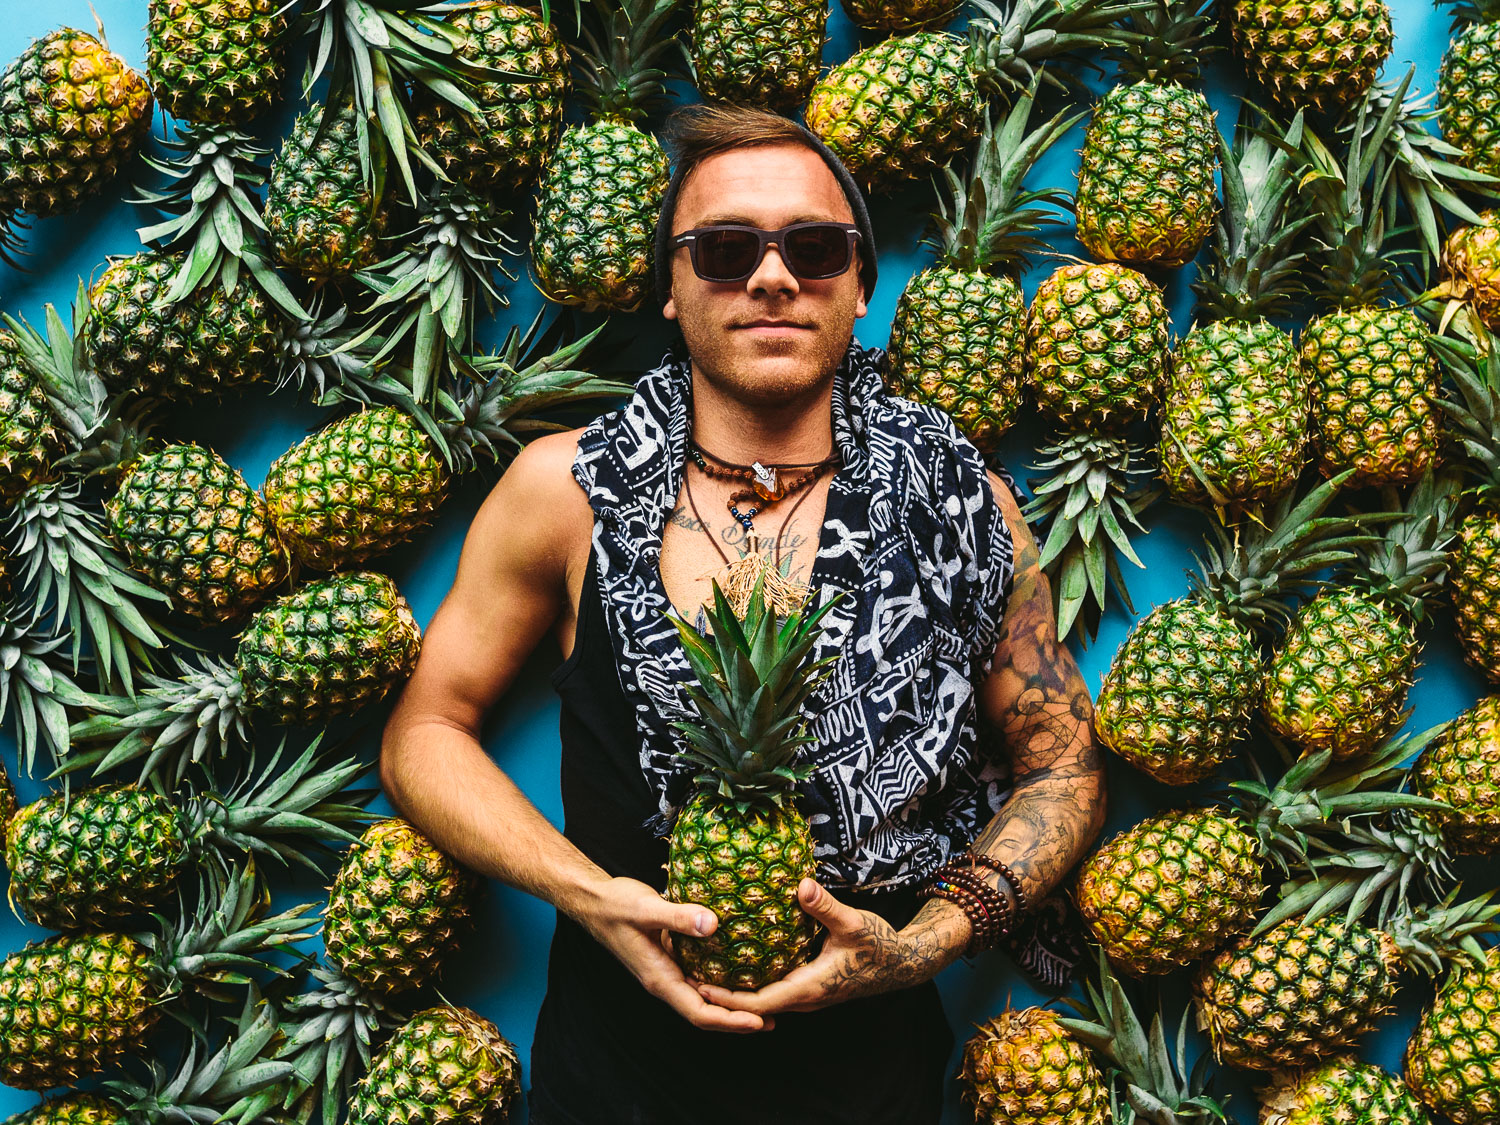 Artwalk 2018 May Pineapple Pyramid Man wearing a black knit cap smiling posing for camera holding a pineapple with pineapples surrounding his head on a teal background